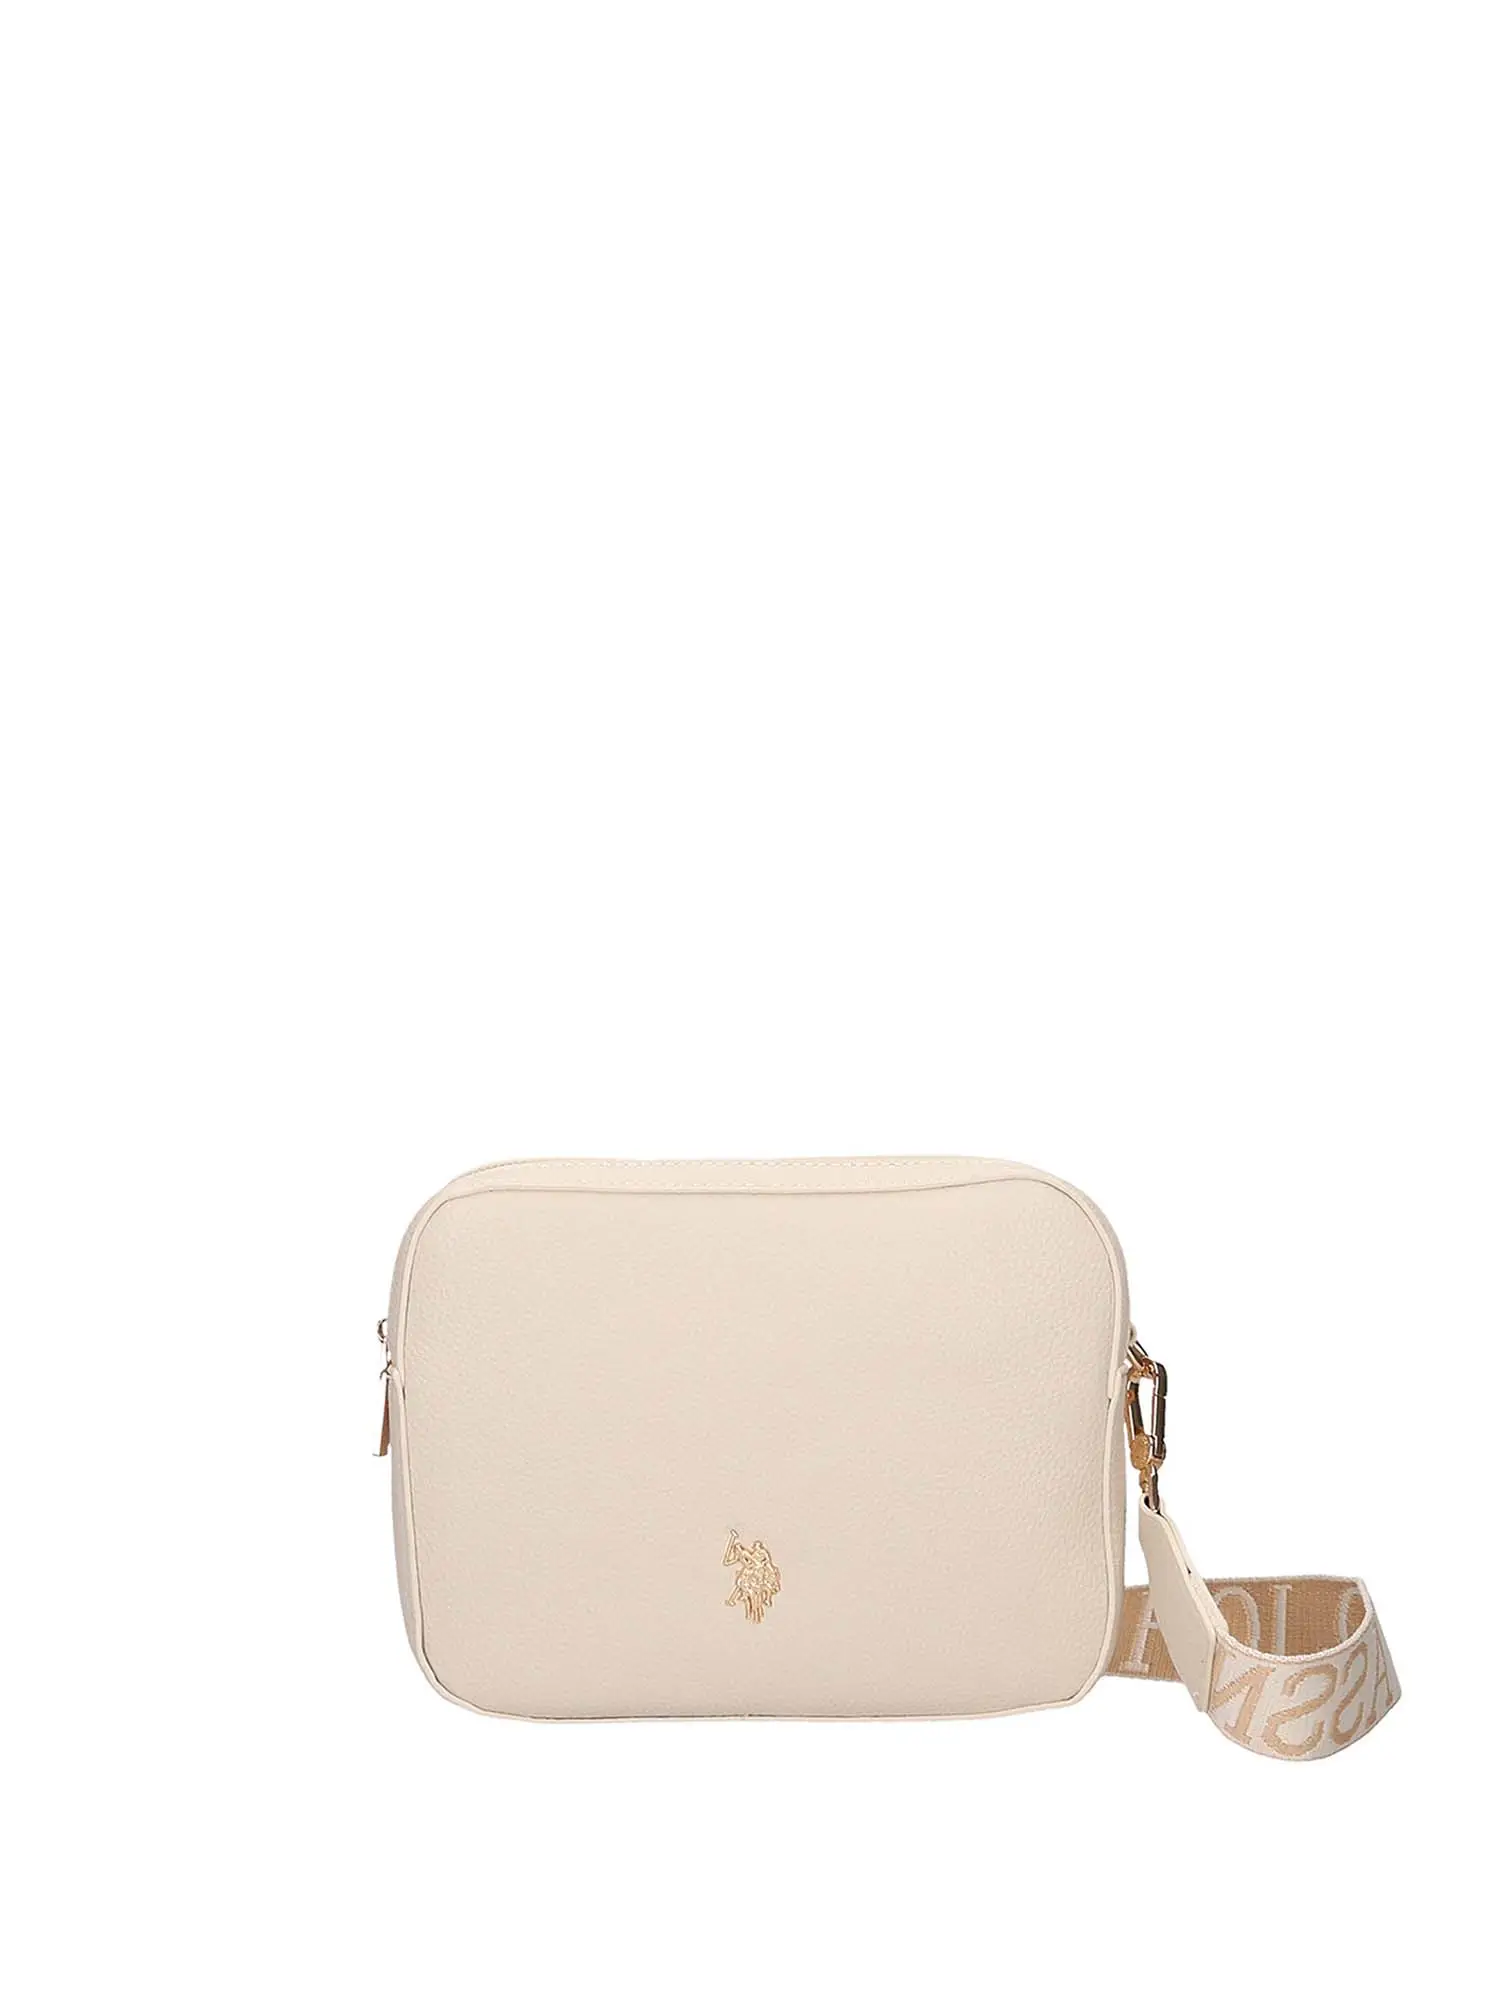 TRACOLLA DONNA - US POLO ASSN. - BEUE56393WVP - BIANCO, UNICA